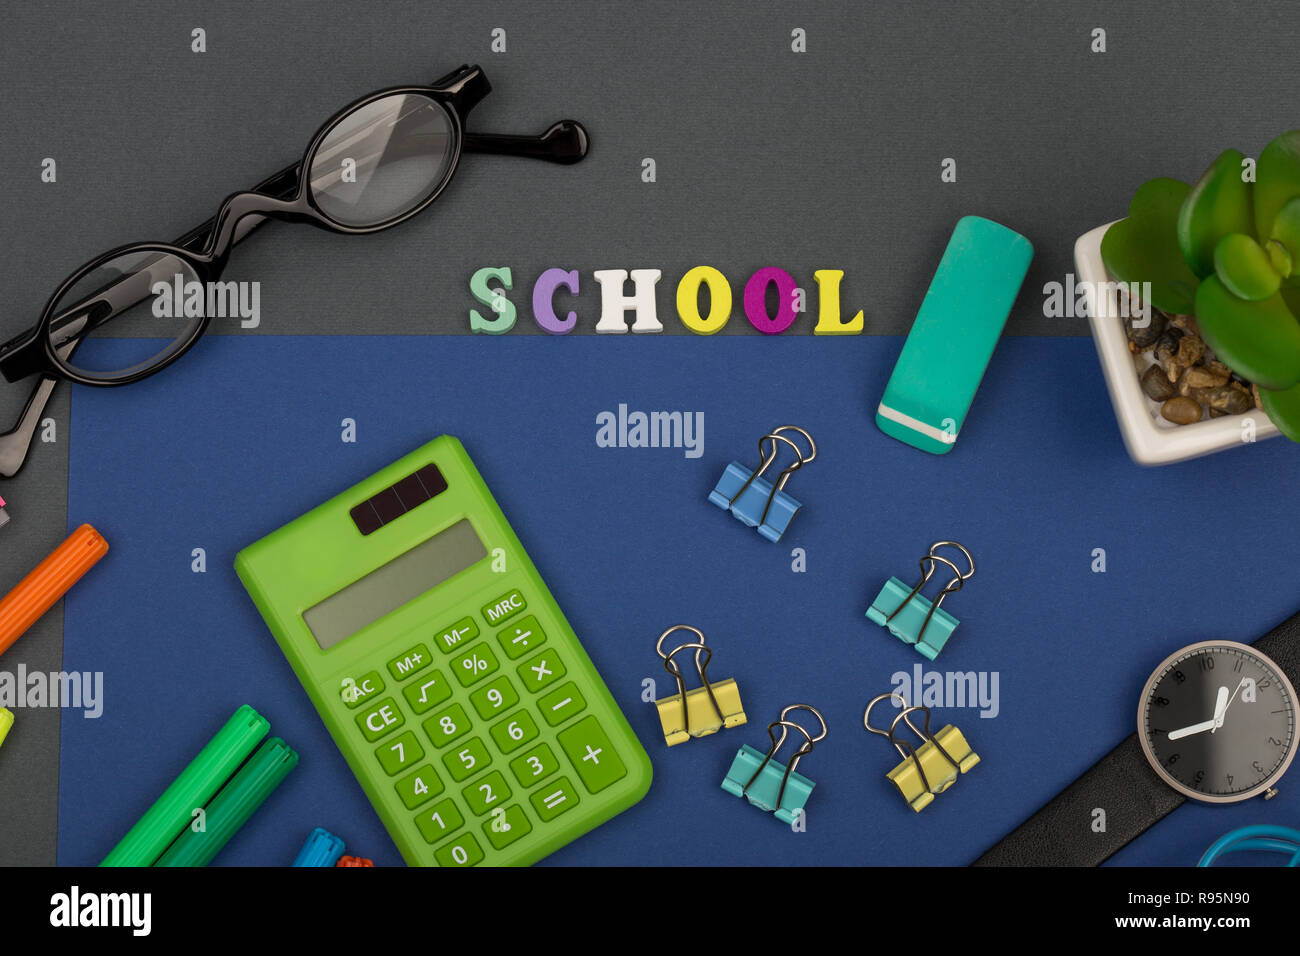 School set with blue paper, text 'School' of wooden letters, calculator, markers, eyeglasses, watch and other stationery on grey background Stock Photo